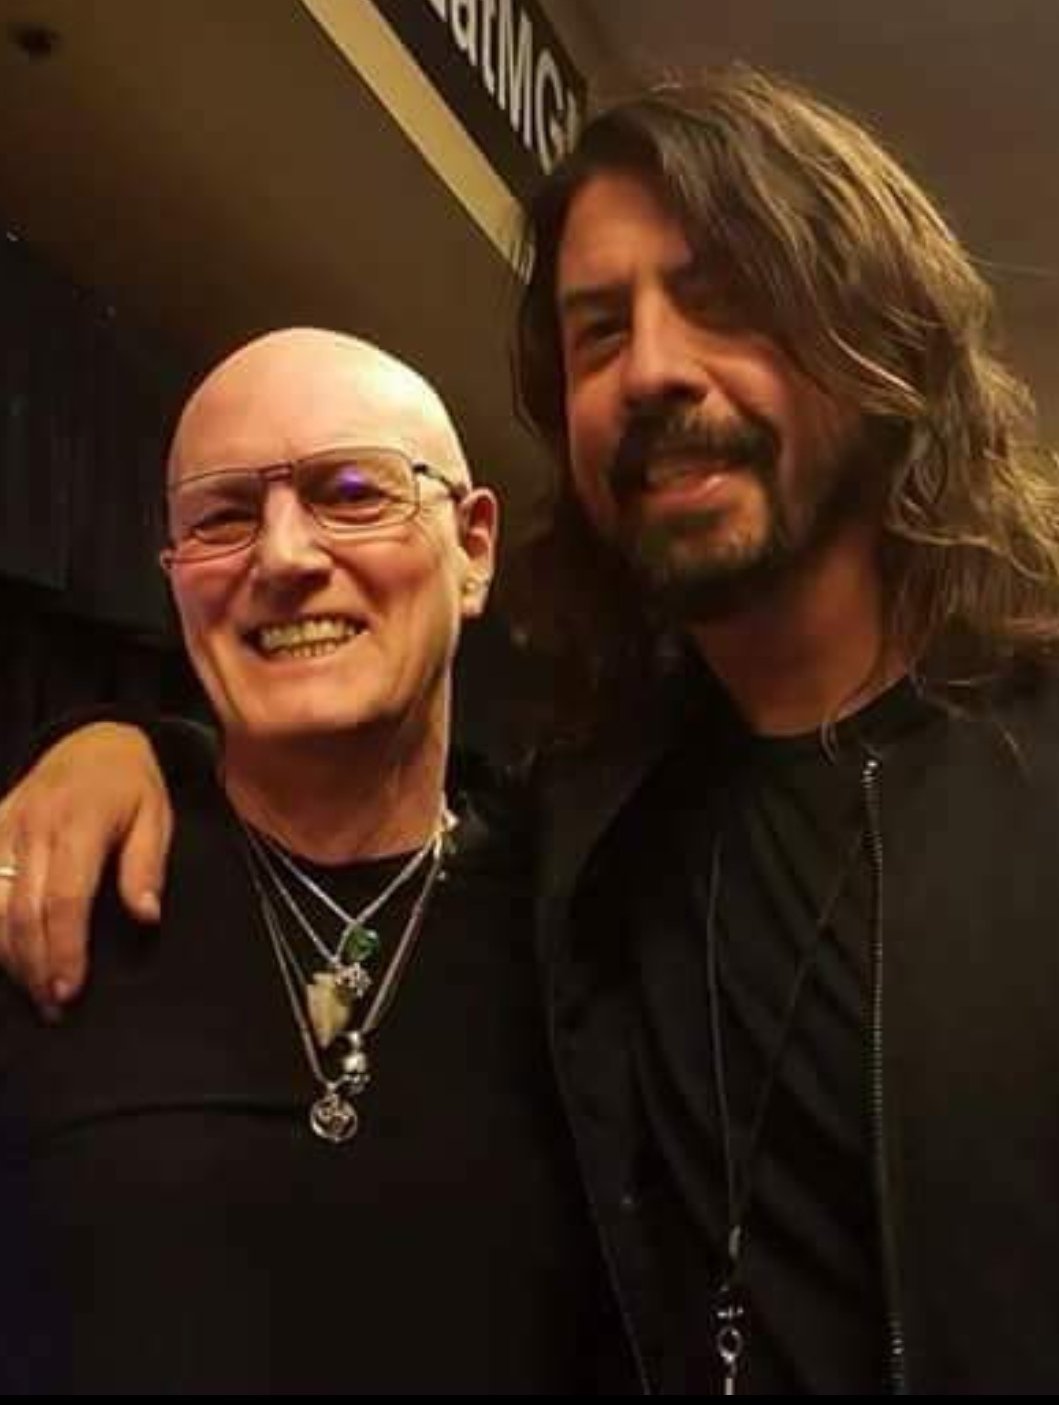 Wishing Happy Birthday today to
DAVE GROHL  